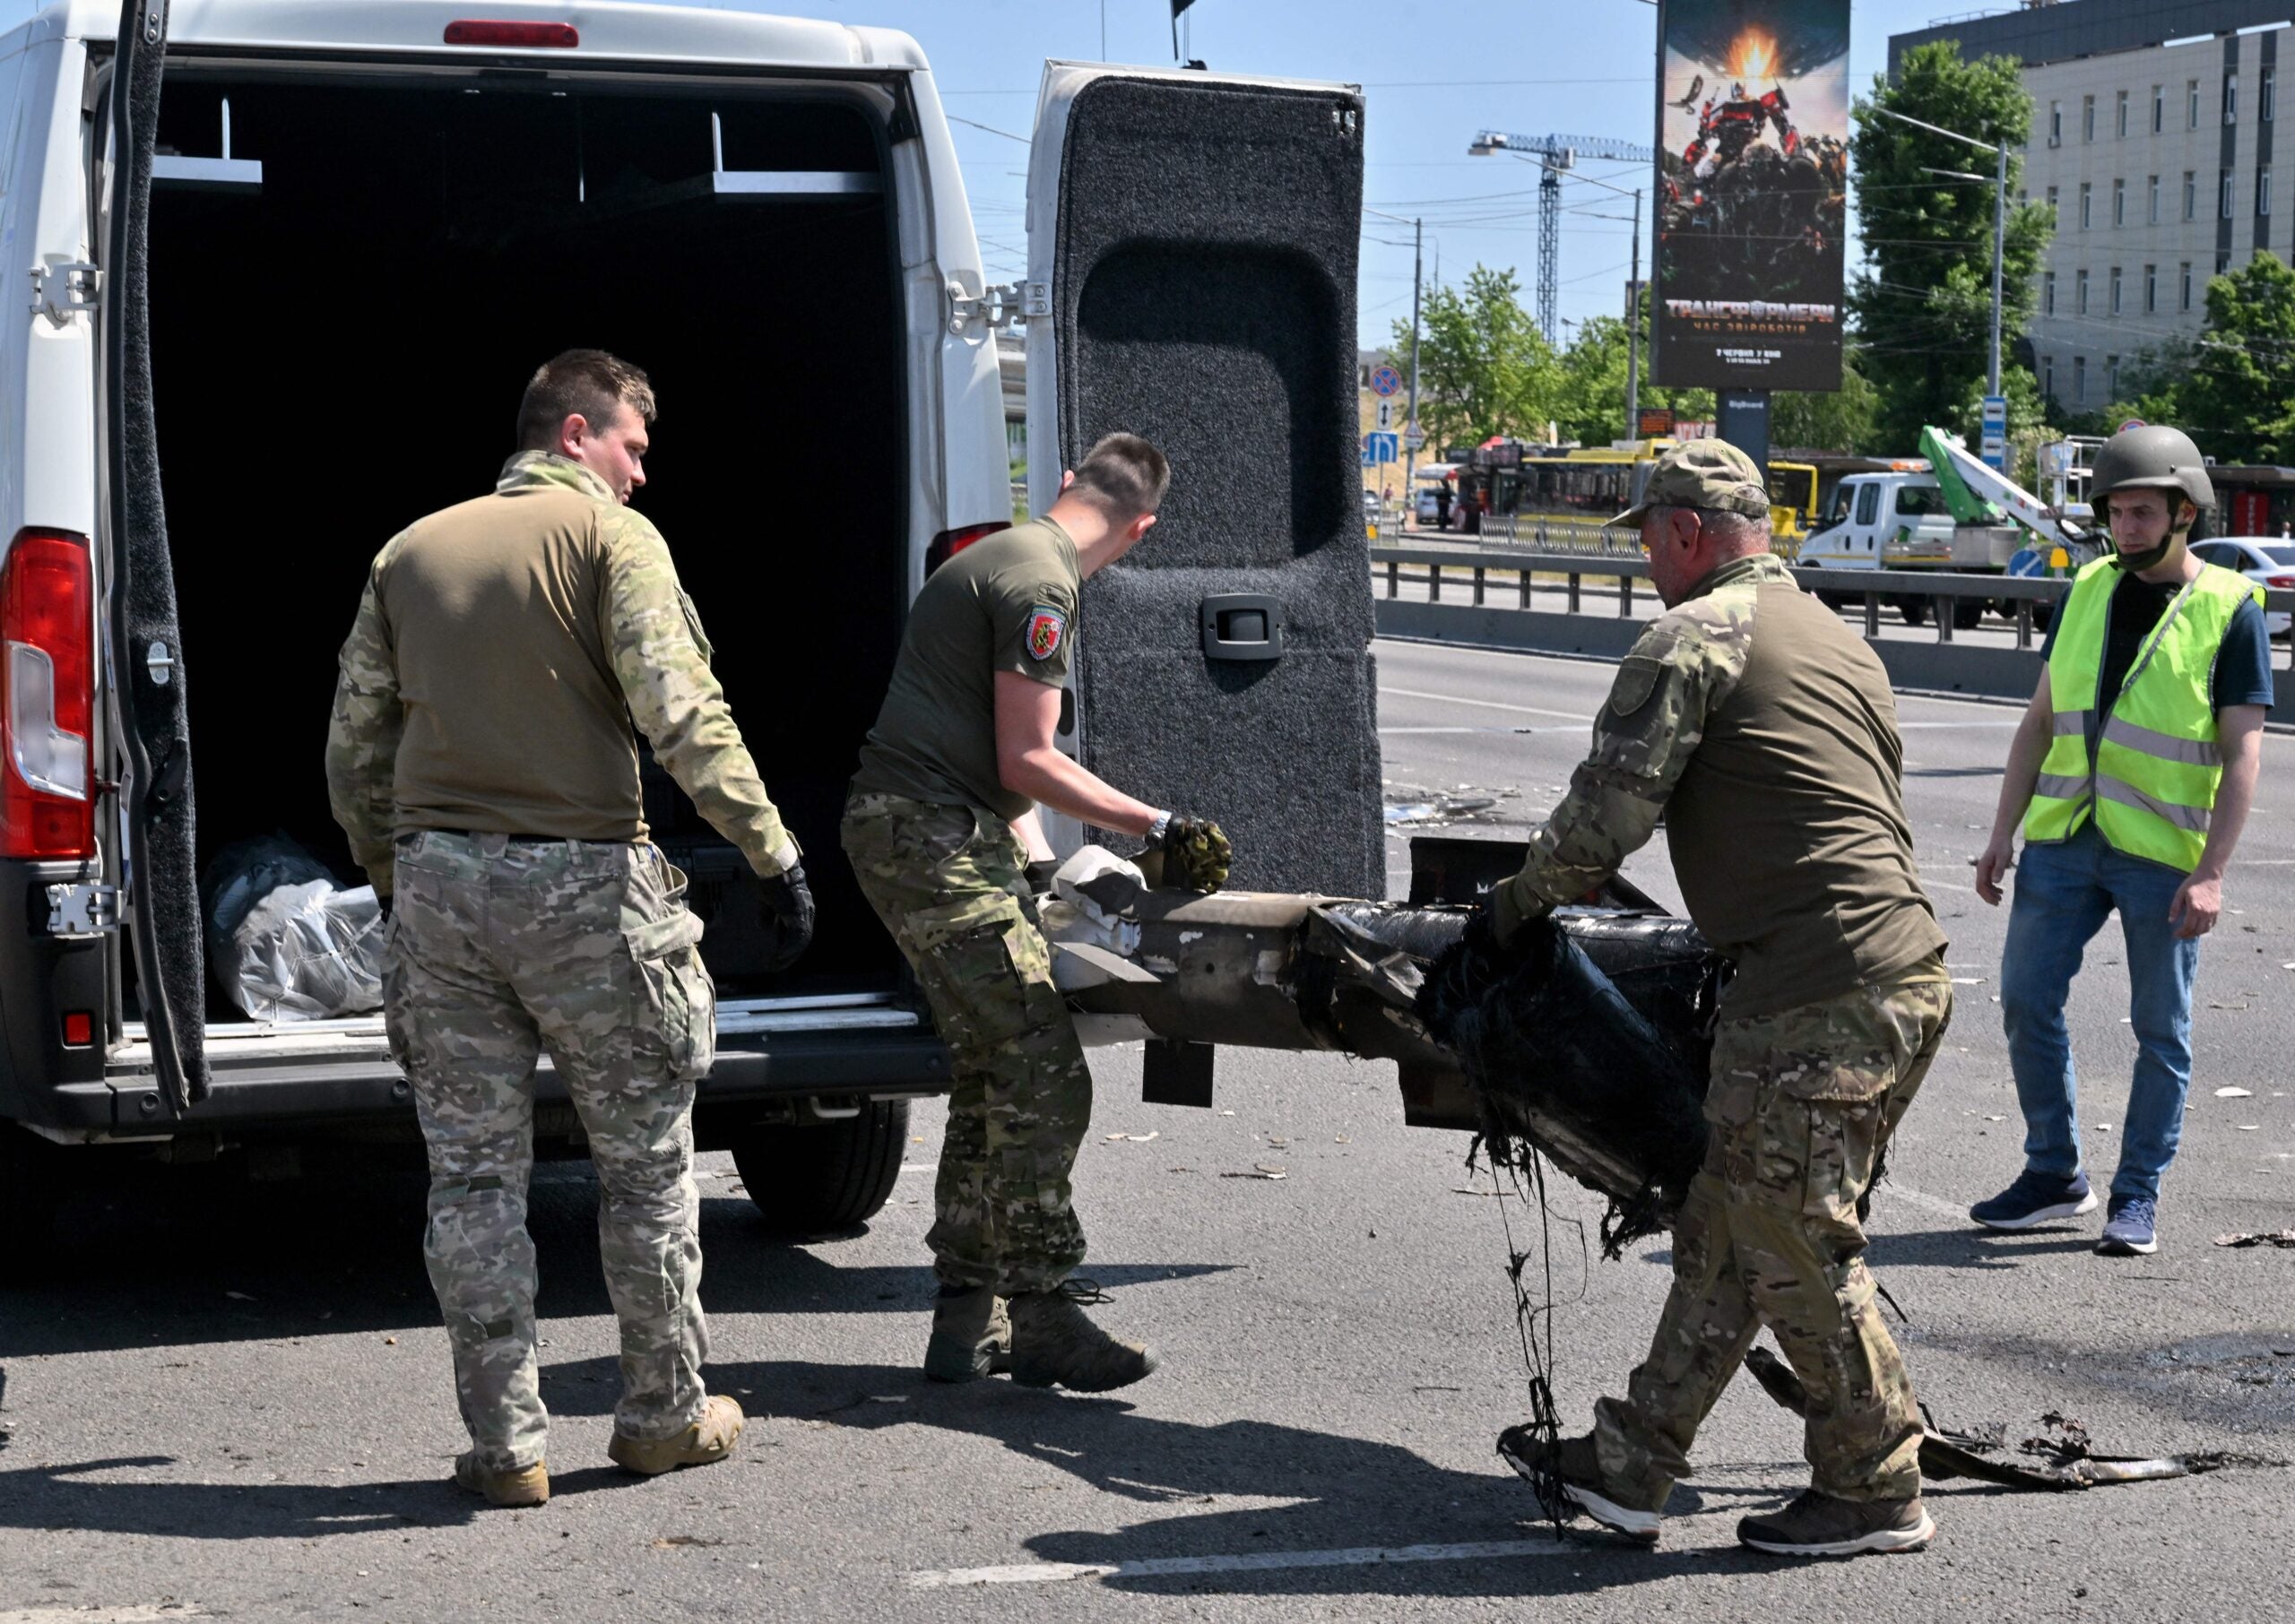 Police experts load fragments of a missile into a car after Russia fired a barrage of missiles for the second time in 24 hours, in an unusual daytime attack targetting the Ukrainian capital following overnight strikes, in Kyiv, on May 29, 2023. "A total of 11 missiles were fired: 'Iskander-M' and 'Iskander-K' from a northerly direction," Ukraine's armed forces chief Valery Zaluzhny said, adding that "all the targets were destroyed by air defences" (Photo by Sergei SUPINSKY / AFP) (Photo by SERGEI SUPINSKY/AFP via Getty Images)